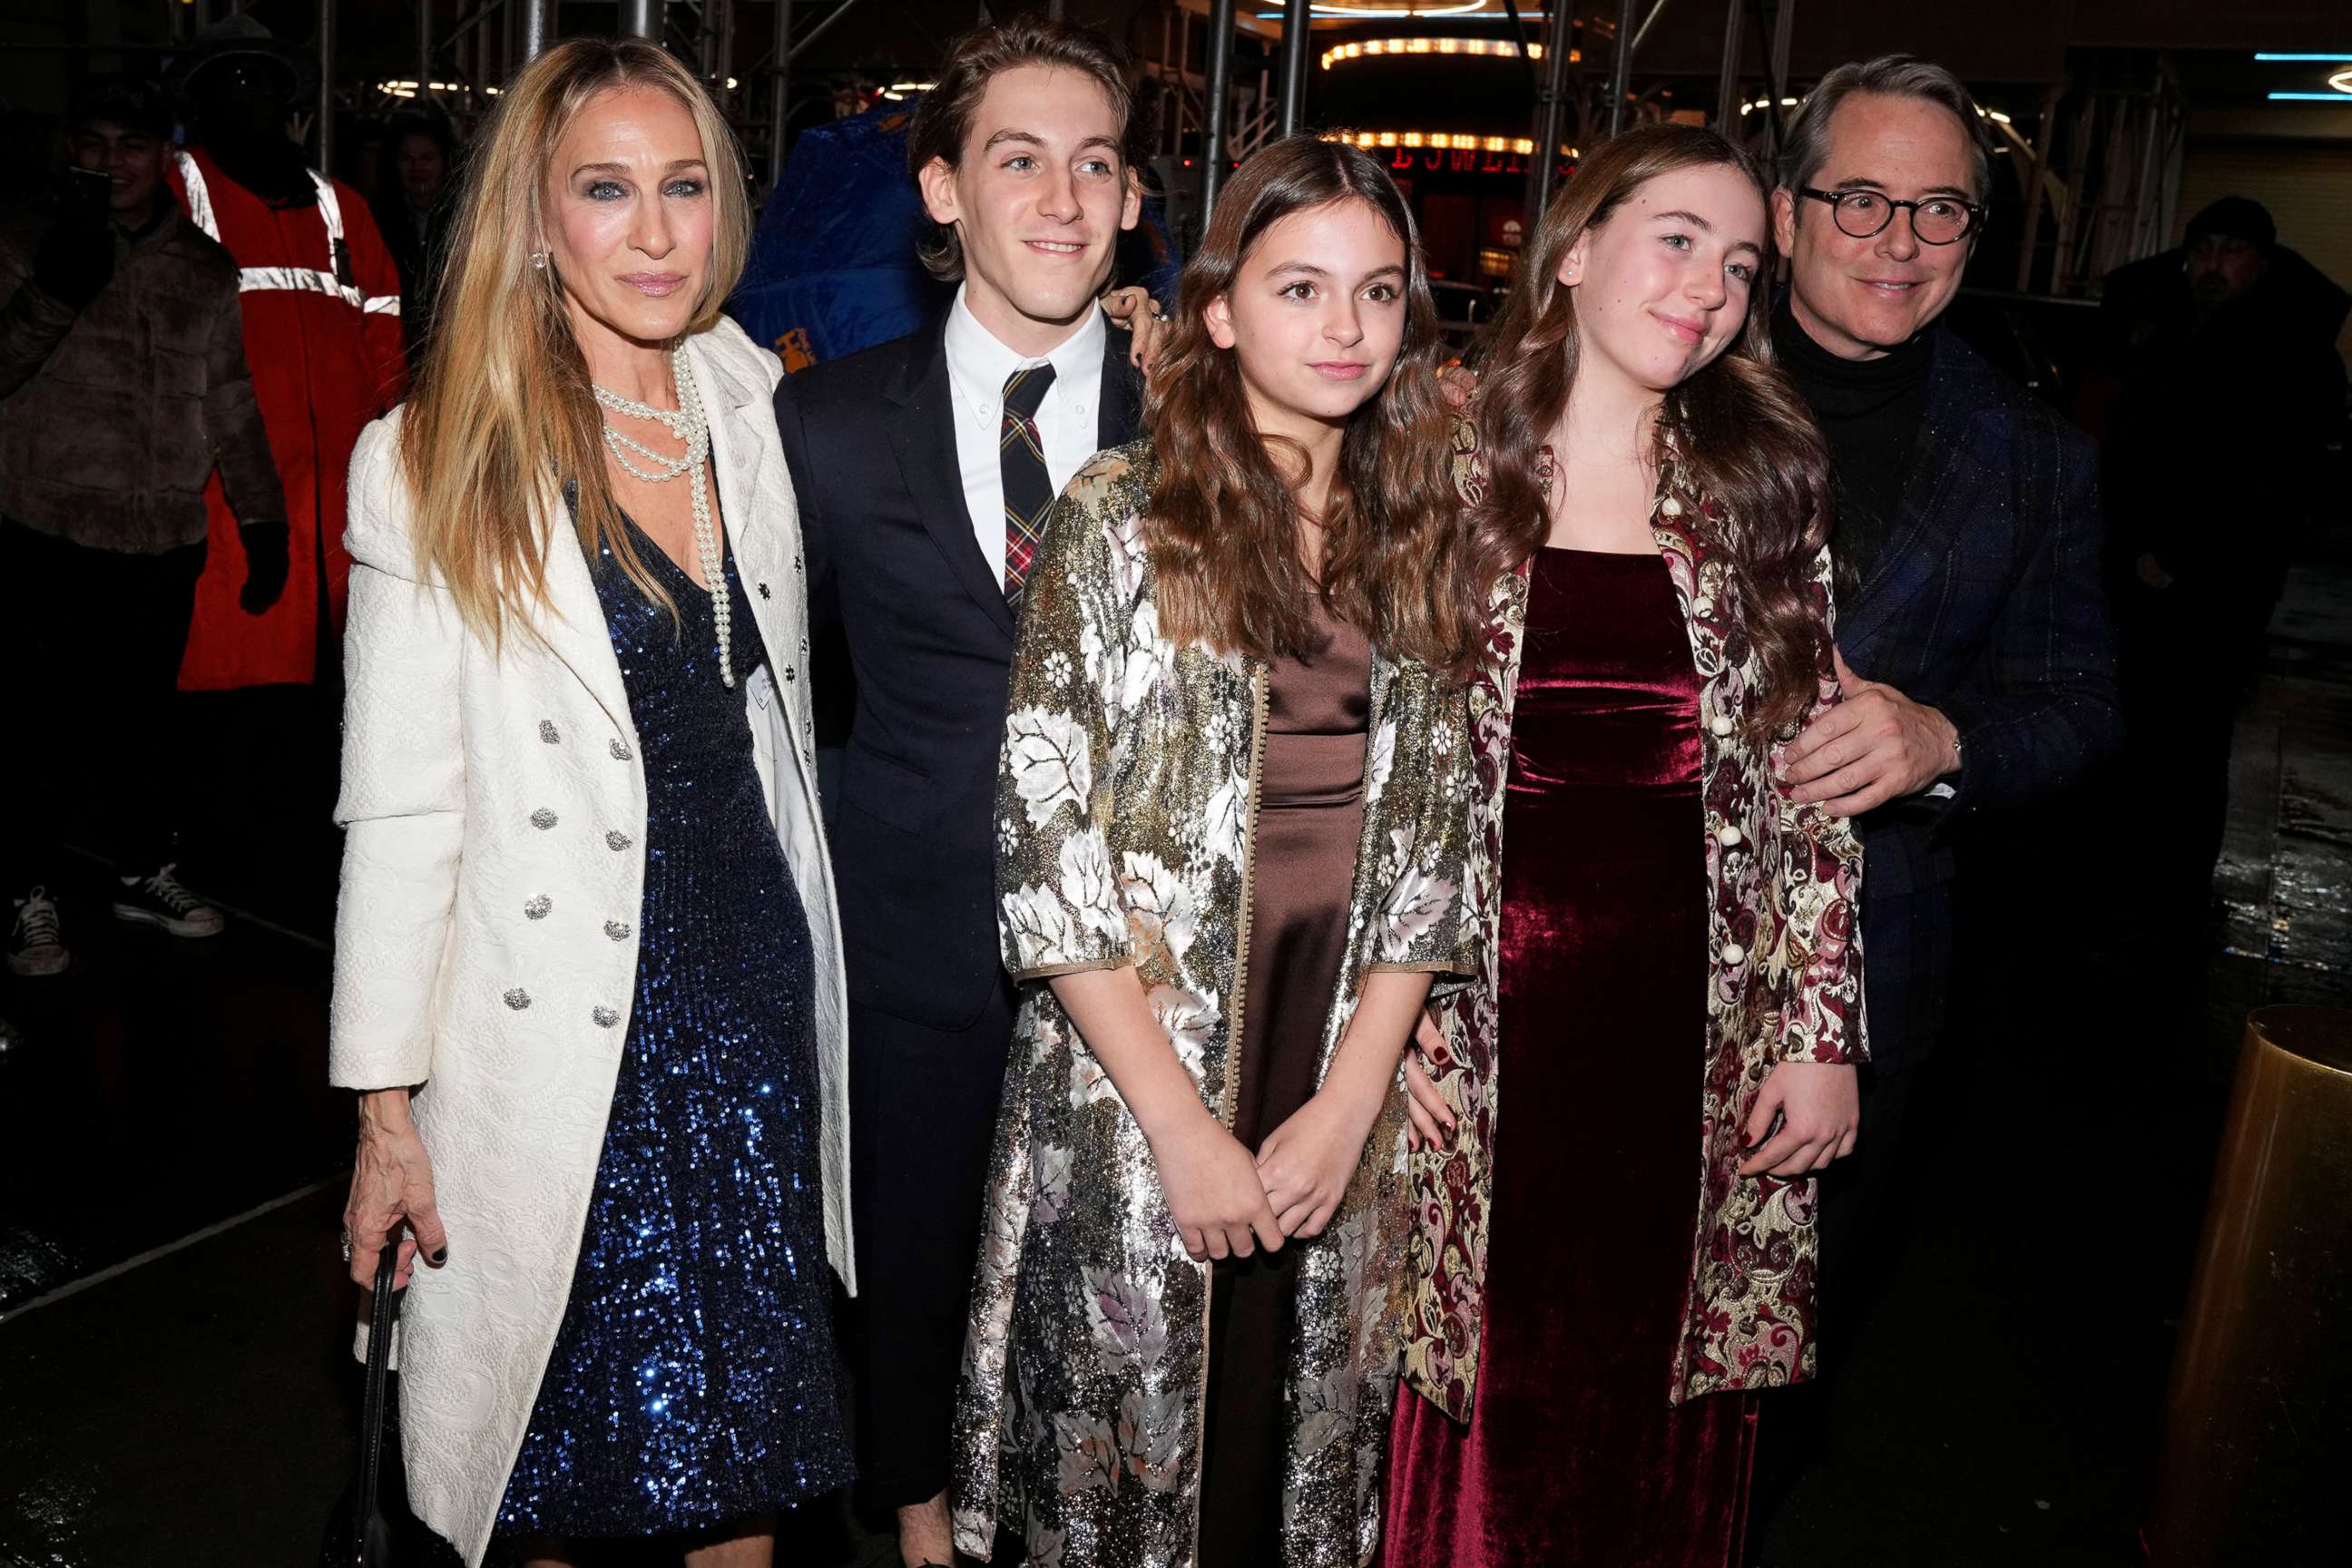 PHOTO: Sarah Jessica Parker, left, James Wilkie Broderick, Tabitha Hodge Broderick, Marion Loretta Elwell Broderick and Matthew Broderick attend the Broadway musical "Some Like It Hot" opening night at the Shubert Theatre on Dec. 11, 2022, in New York.